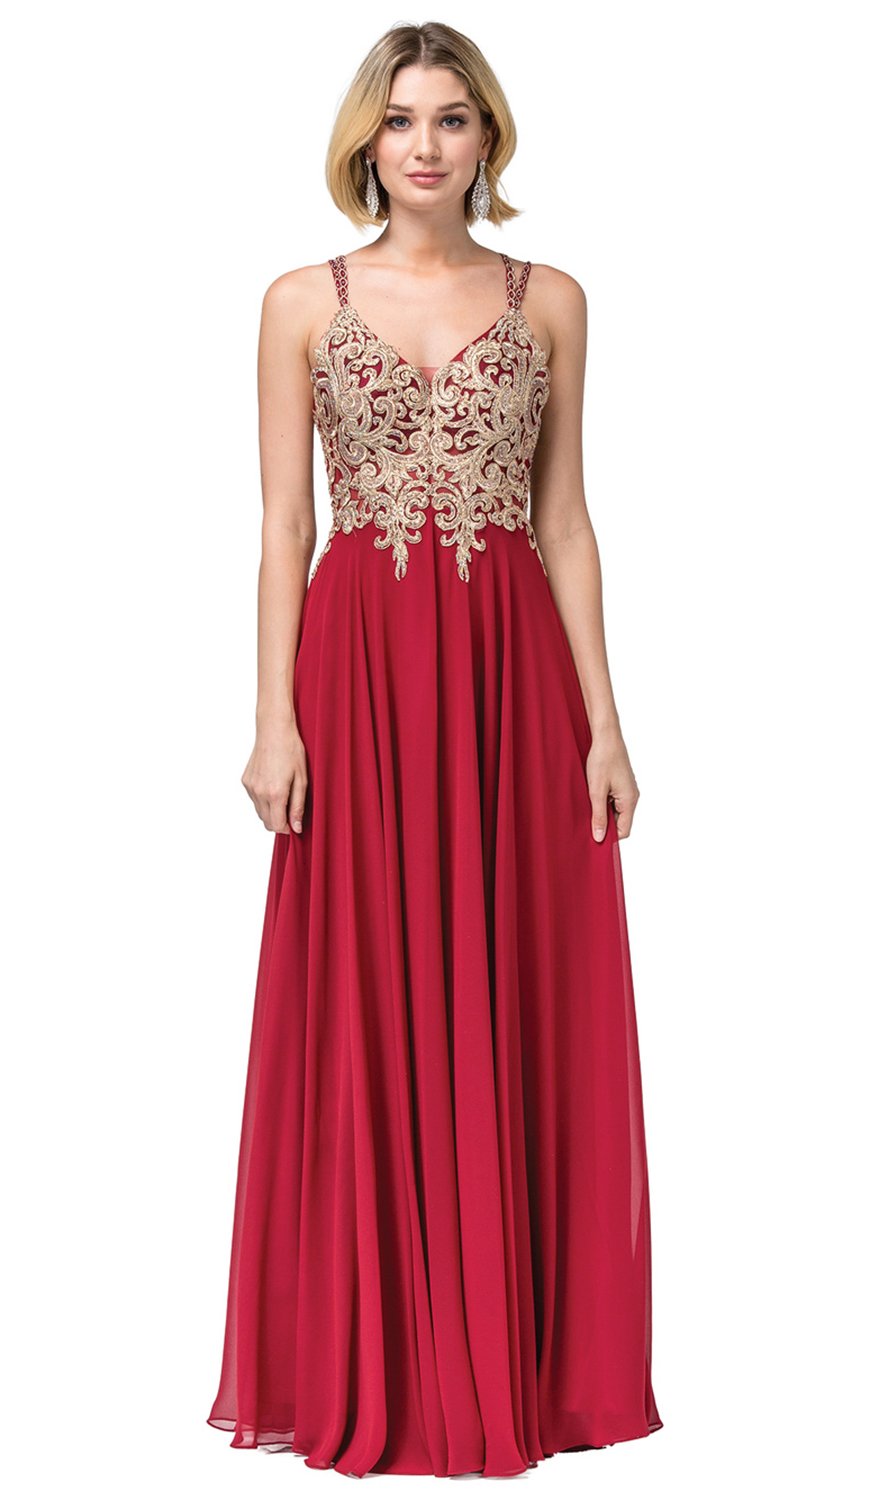 Dancing Queen - 2890 Embroidered Plunging V-neck A-line Dress in Red and Gold